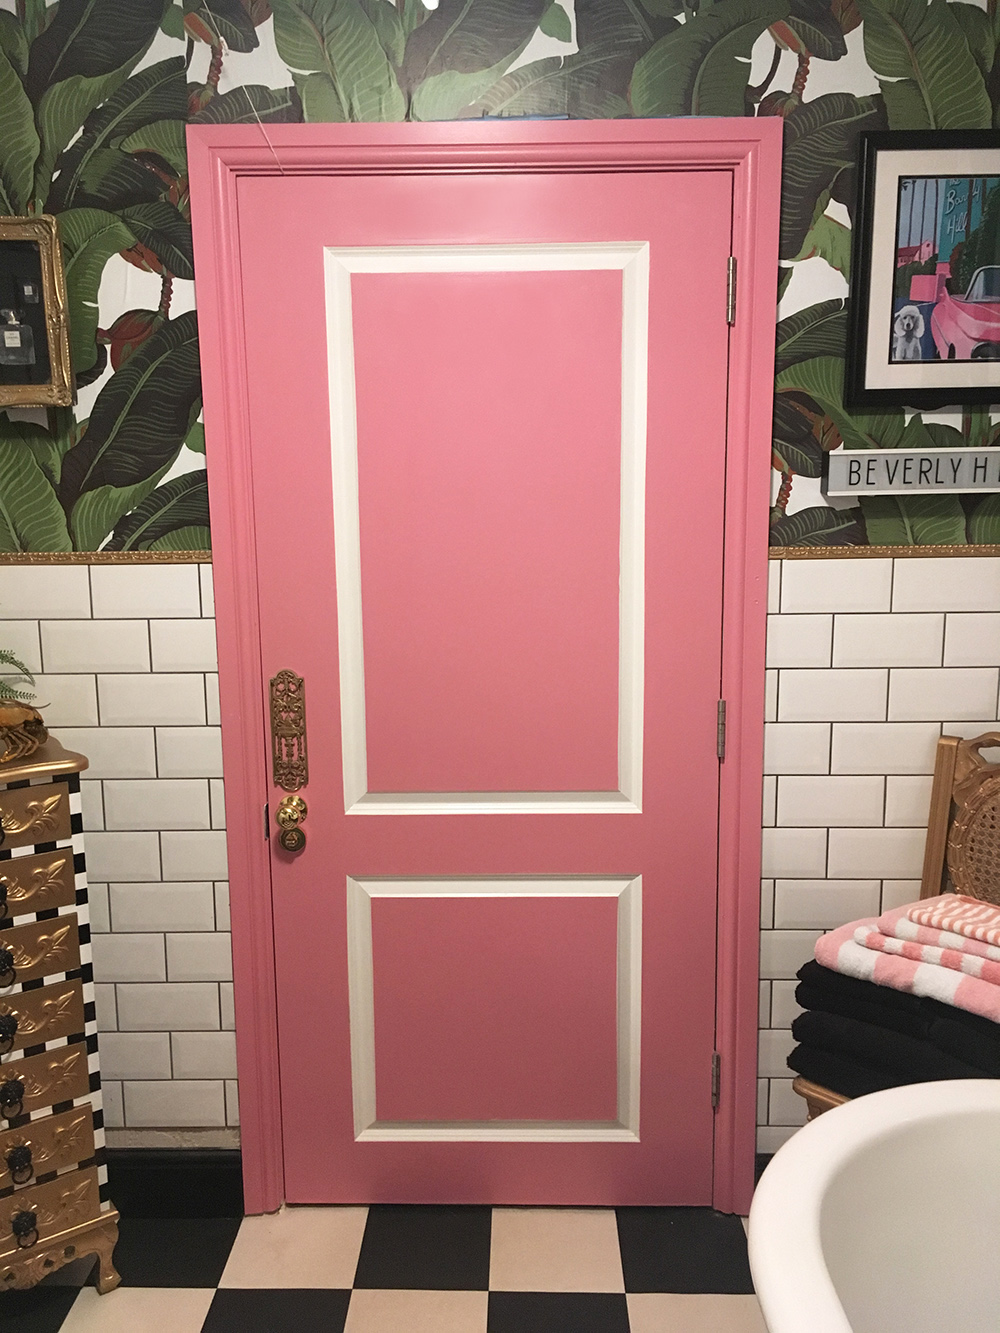 House tour- opulent and eccentric décor. Tropical banana leaf wallpaper in the bathroom with pink accents.